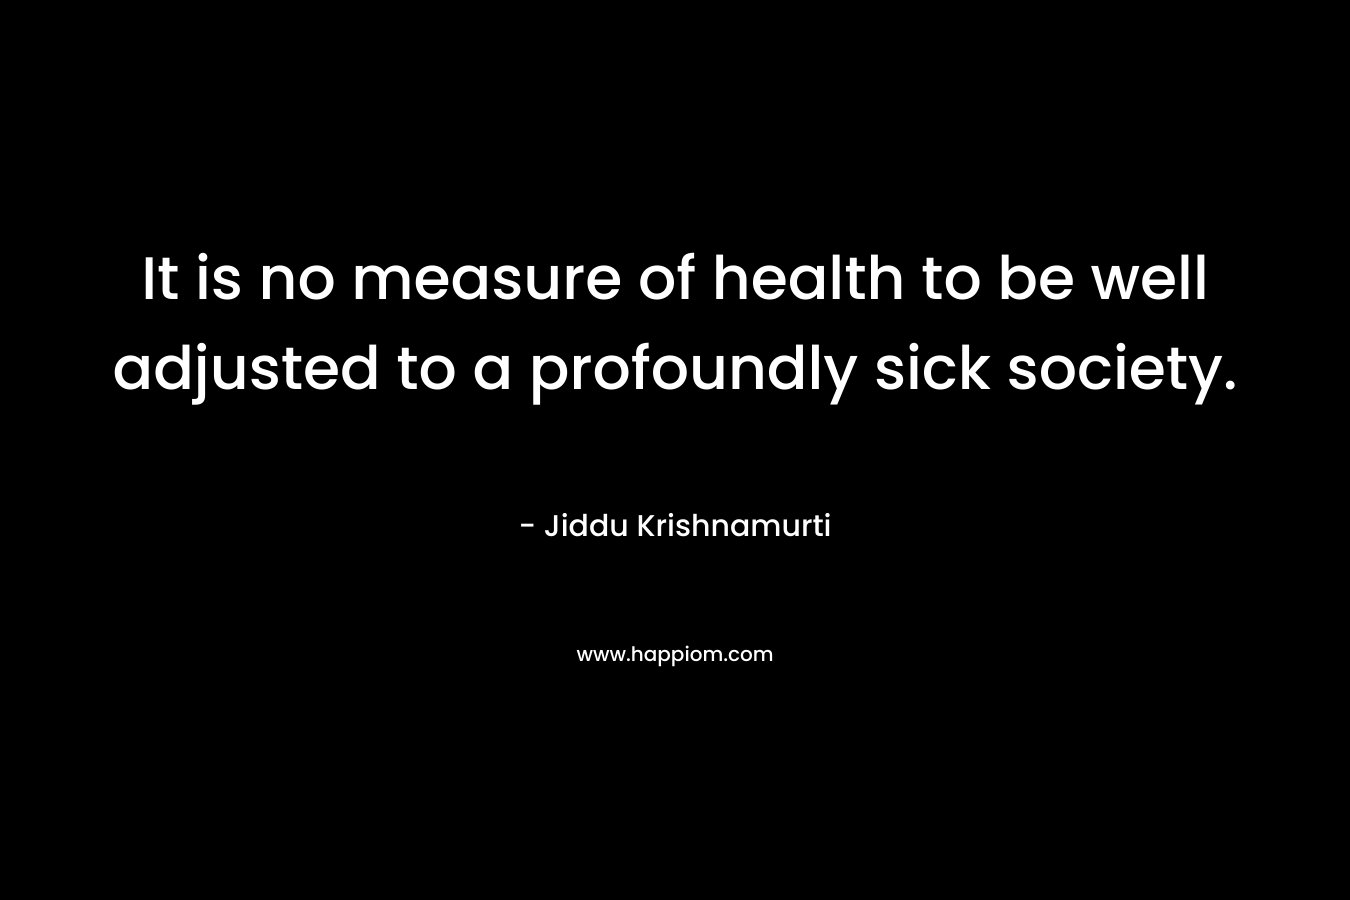 It is no measure of health to be well adjusted to a profoundly sick society. – Jiddu Krishnamurti